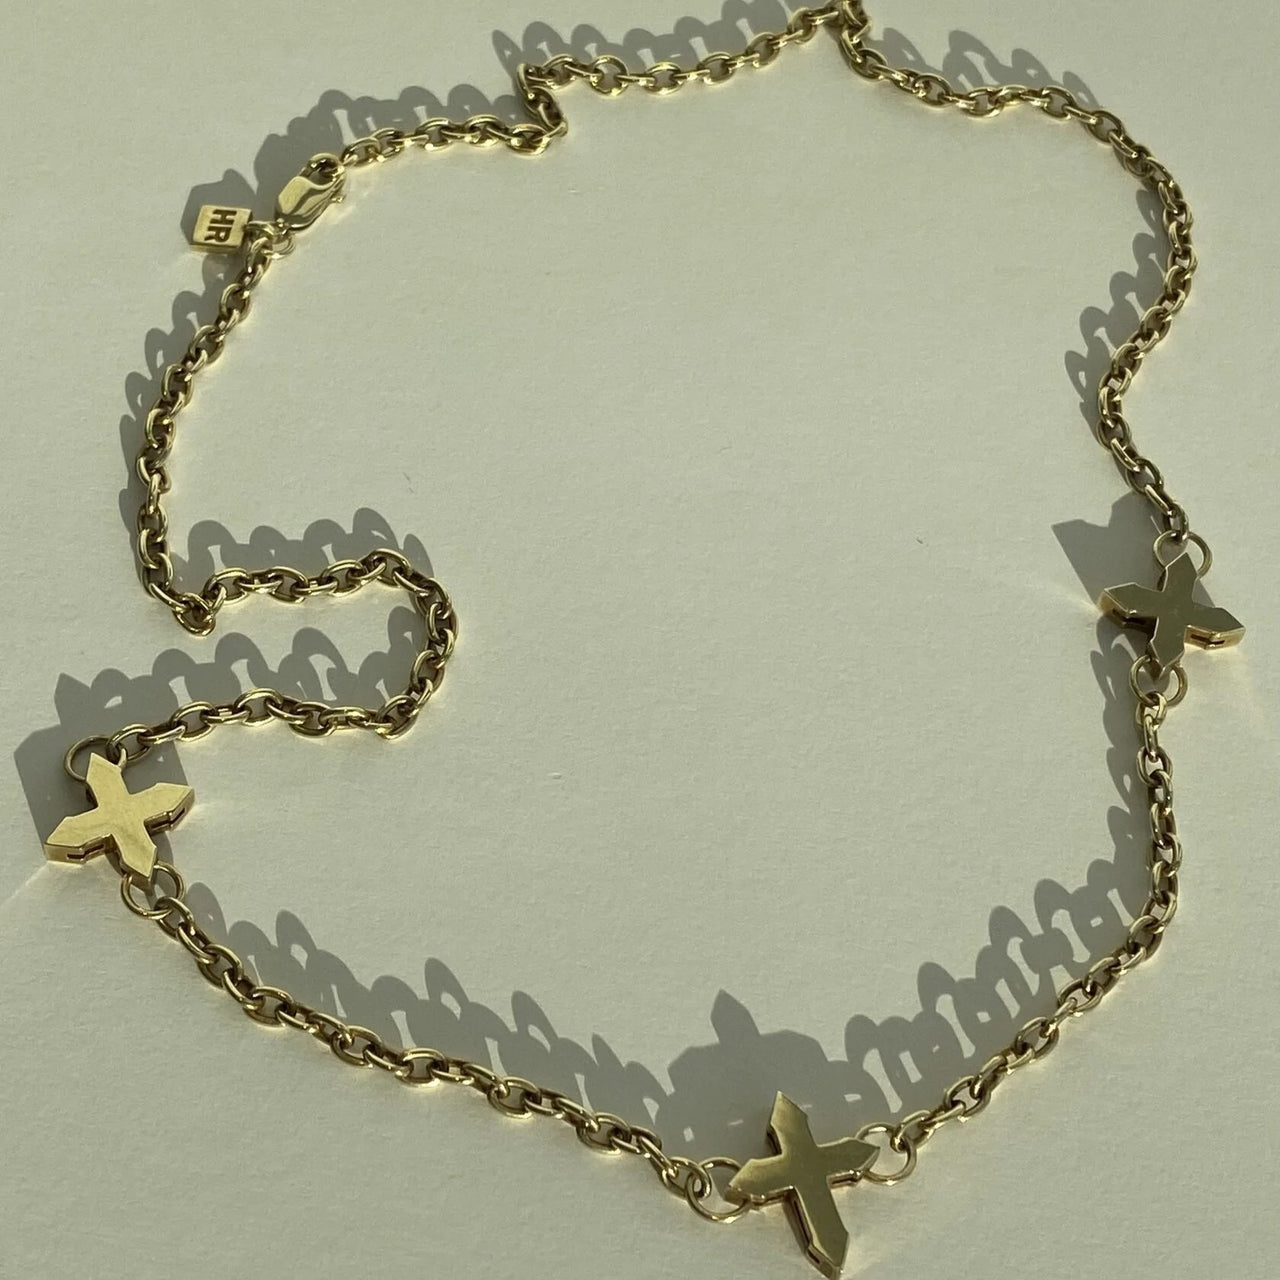 NECKLACE "TRINITY" / SOLID GOLD